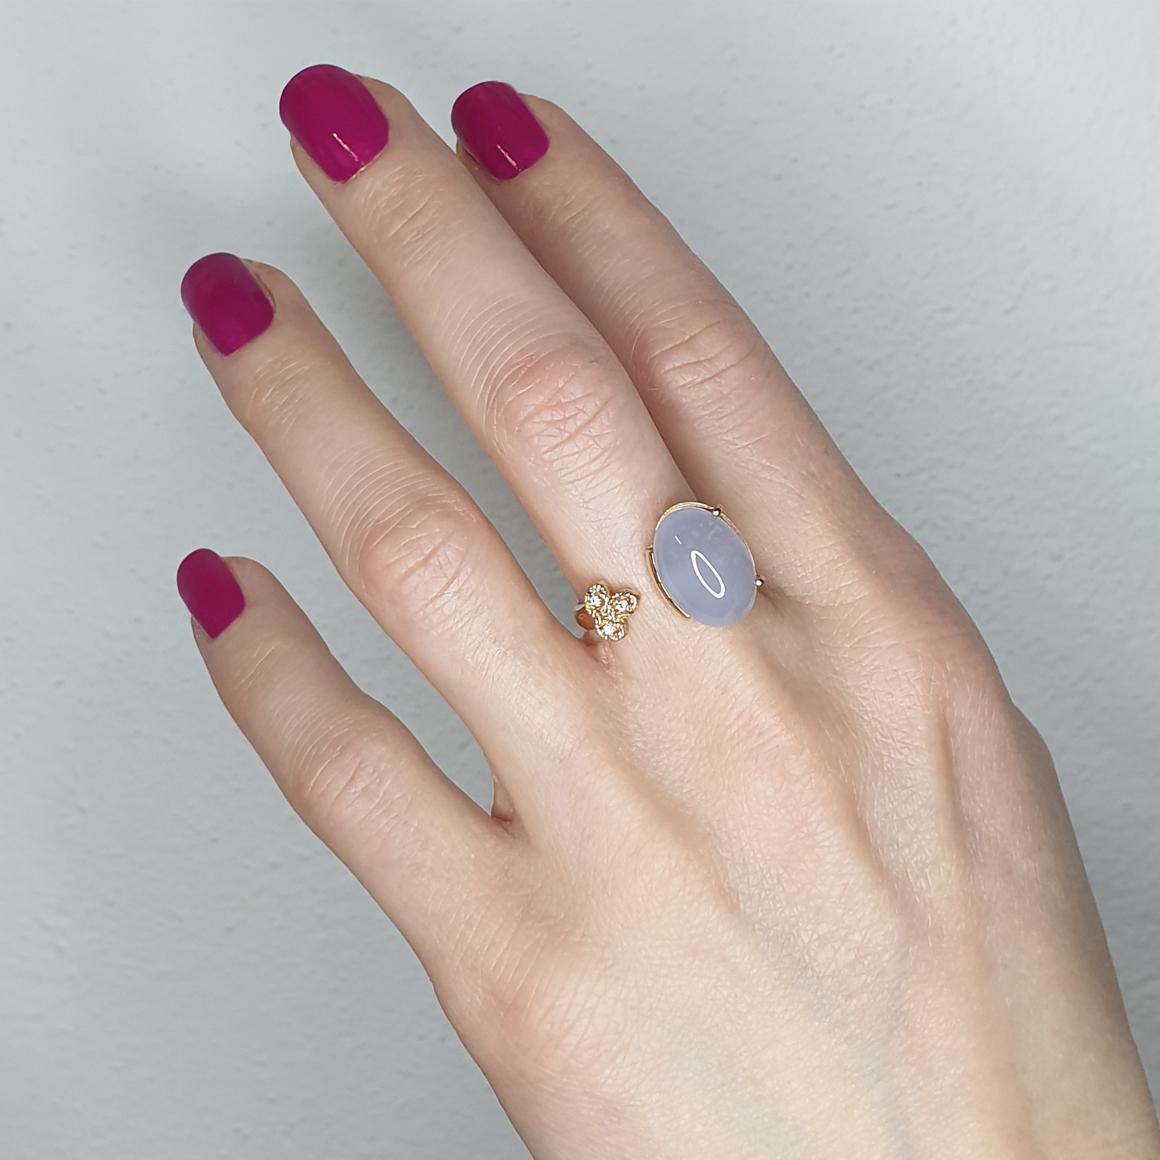 The designer Gisella has a refined taste, her jewels stand out from others. Designed and handmade in Italy by Stanoppi Jewellery since 1948.
Ring in 18k rose gold with Chalcedony (oval cabochon cut, size: 10x14mm) and white Diamonds cts0.03 VS